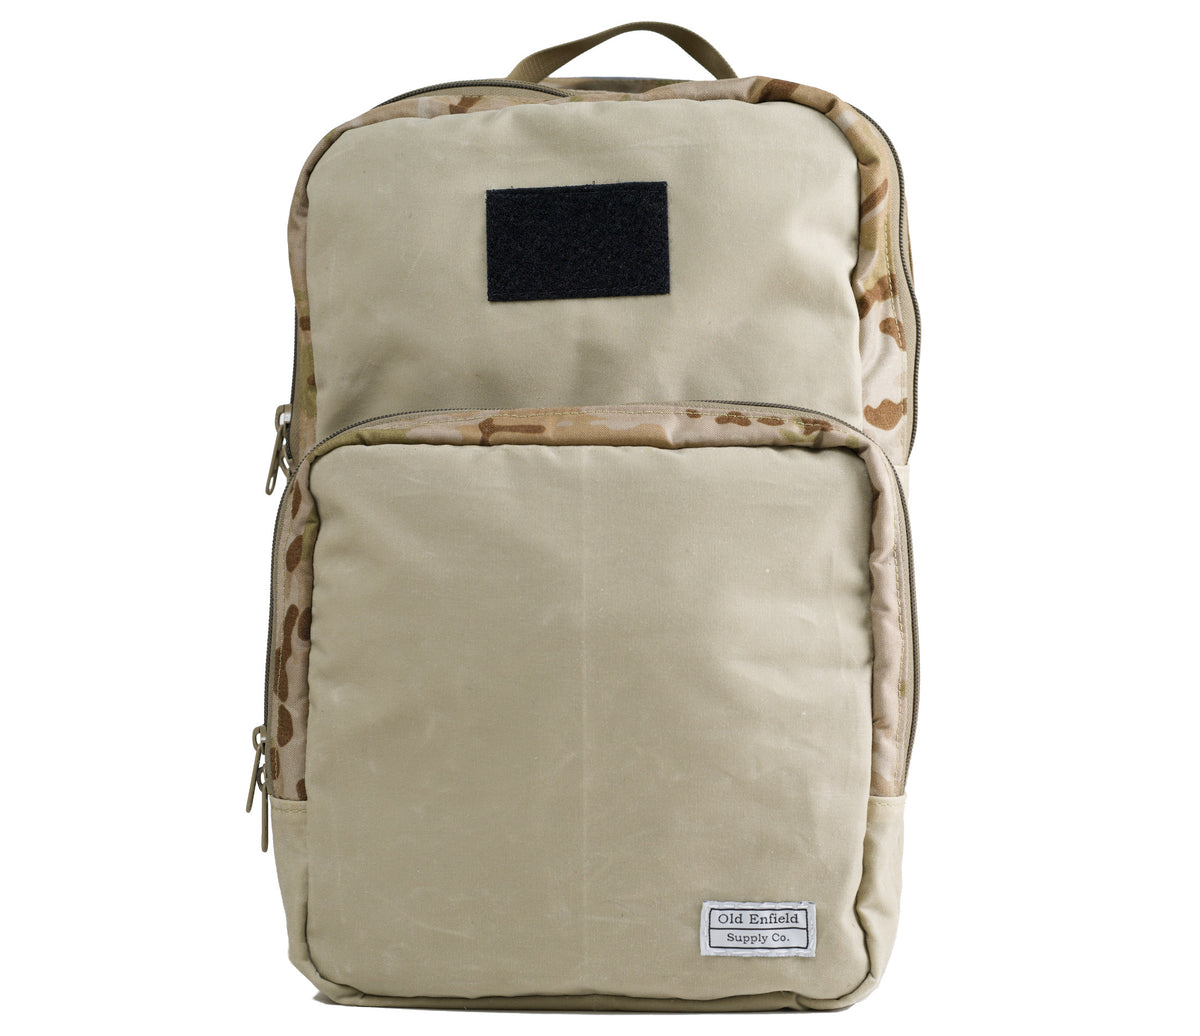 Old Enfield Supply Camo Backpack. Veteran Made Backpack. Wax Canvas Backpack. Waxed Canvas Backpack. Canvas Backpack. Arid Multicam Camo Garrison Backpack. Arid Multicam Backpack. Camo Backpack.